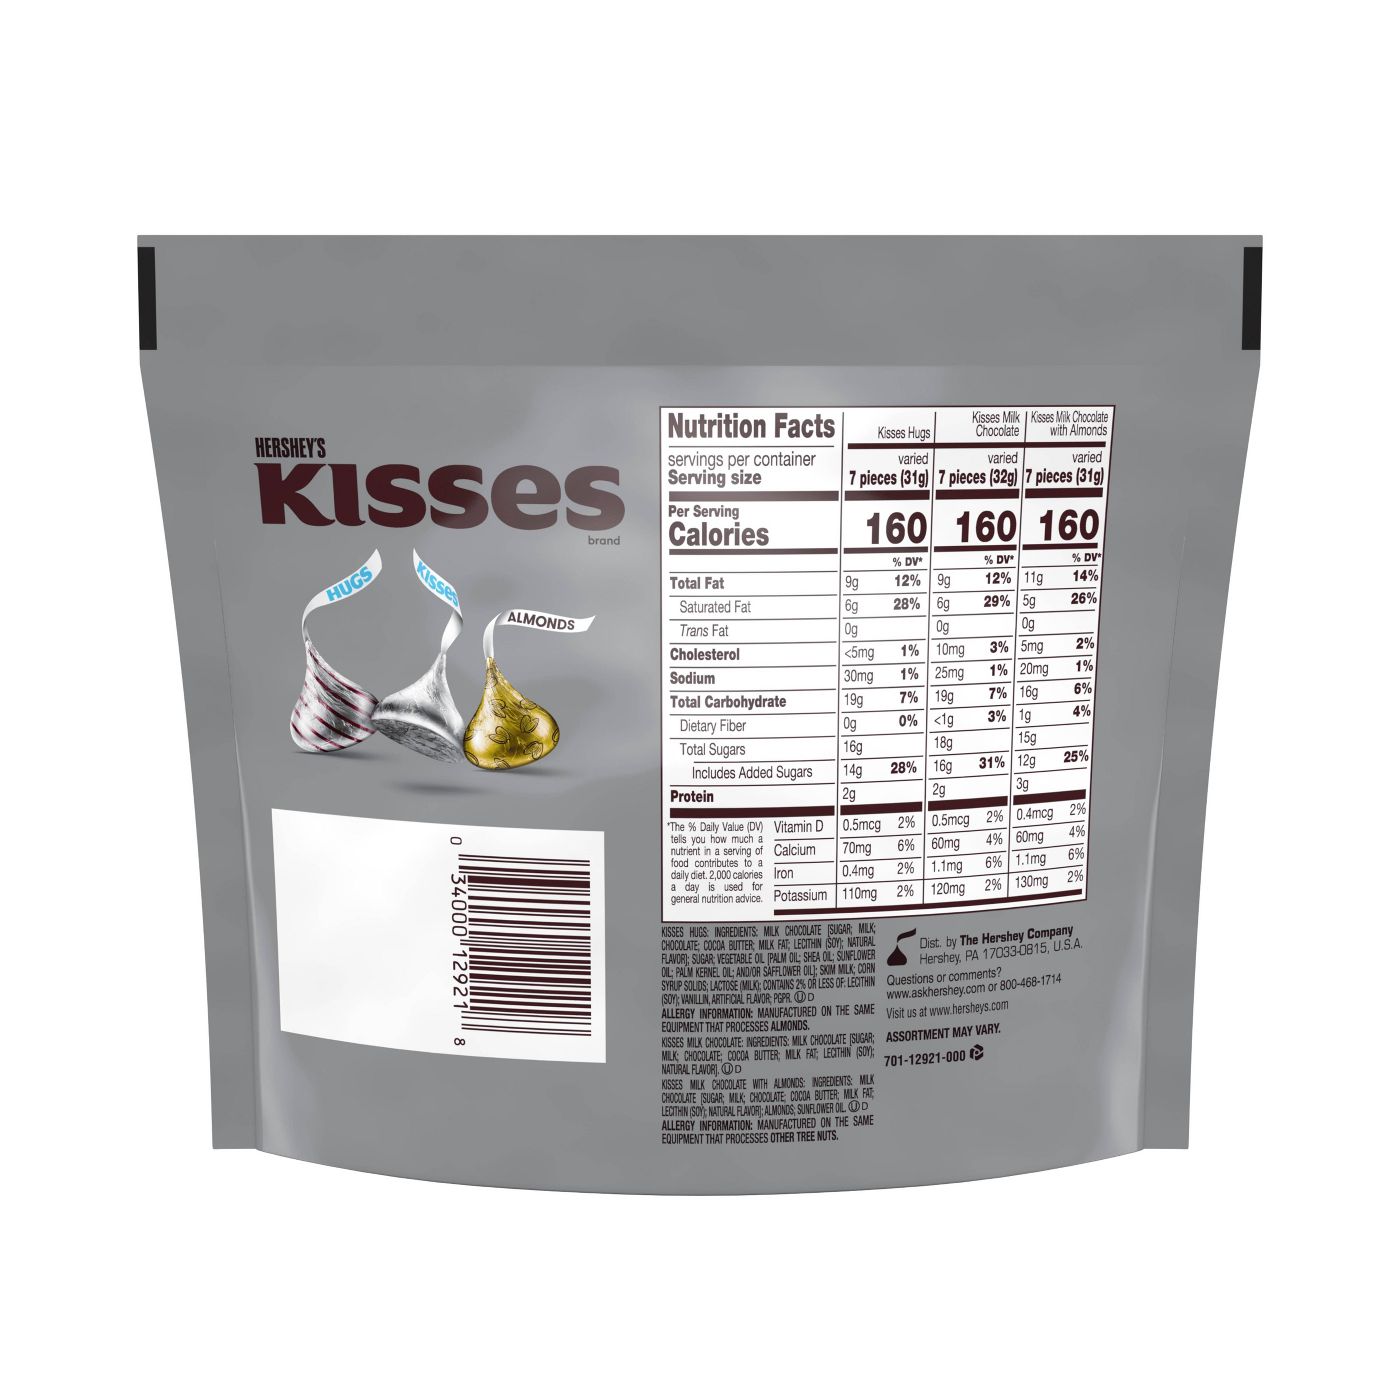 Hershey's Kisses Assortment Chocolate Candy, Share Pack, 10oz